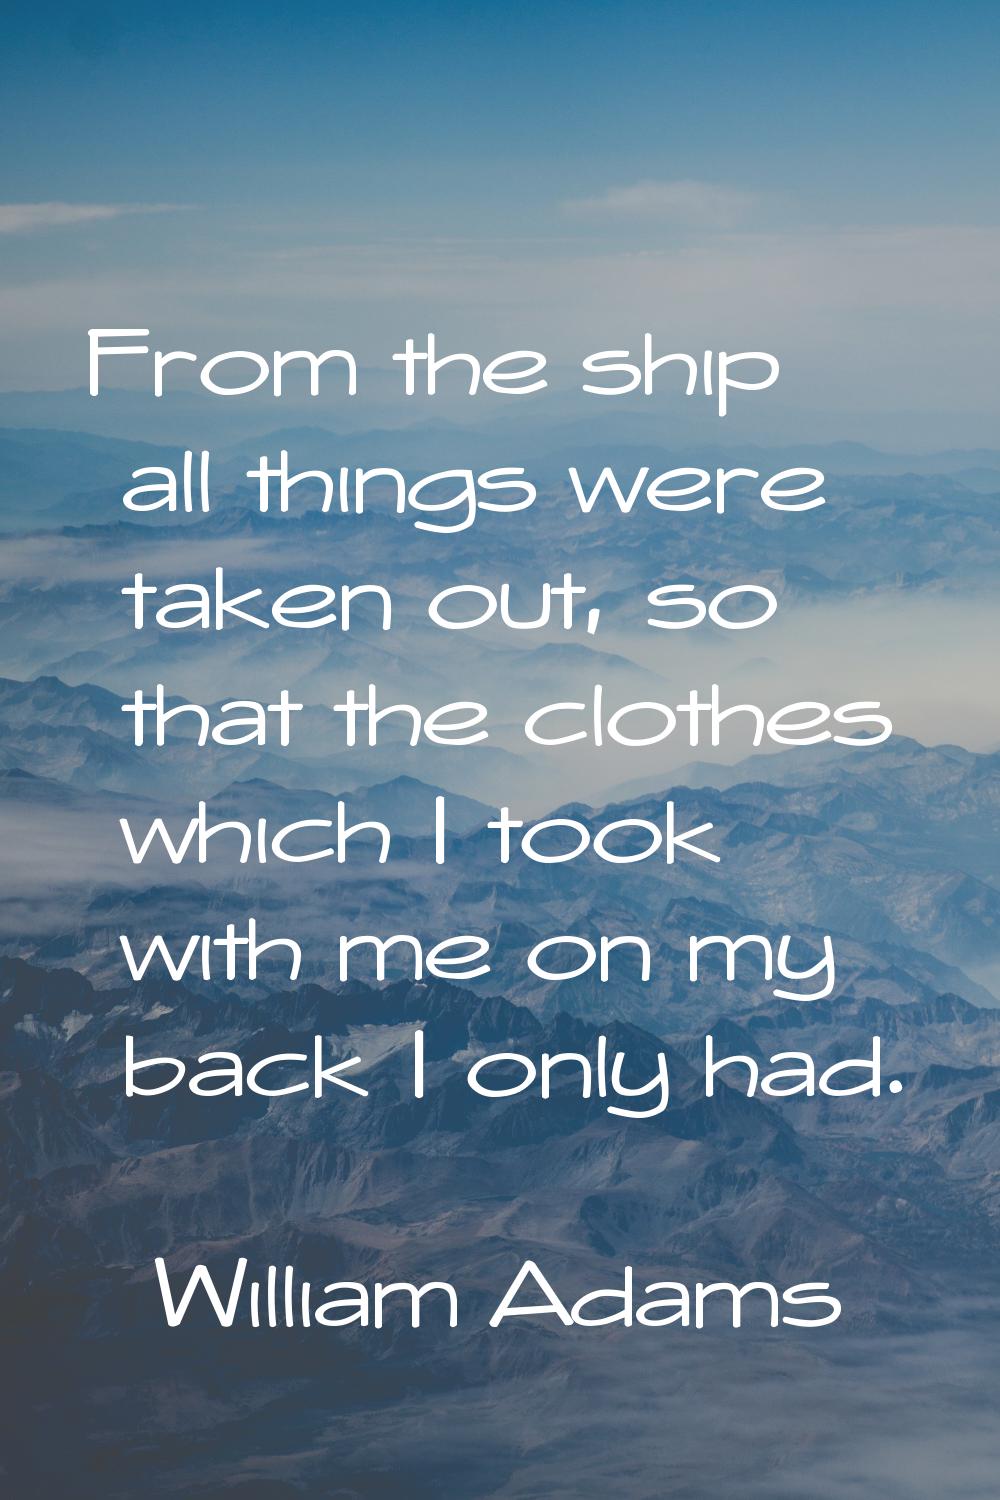 From the ship all things were taken out, so that the clothes which I took with me on my back I only